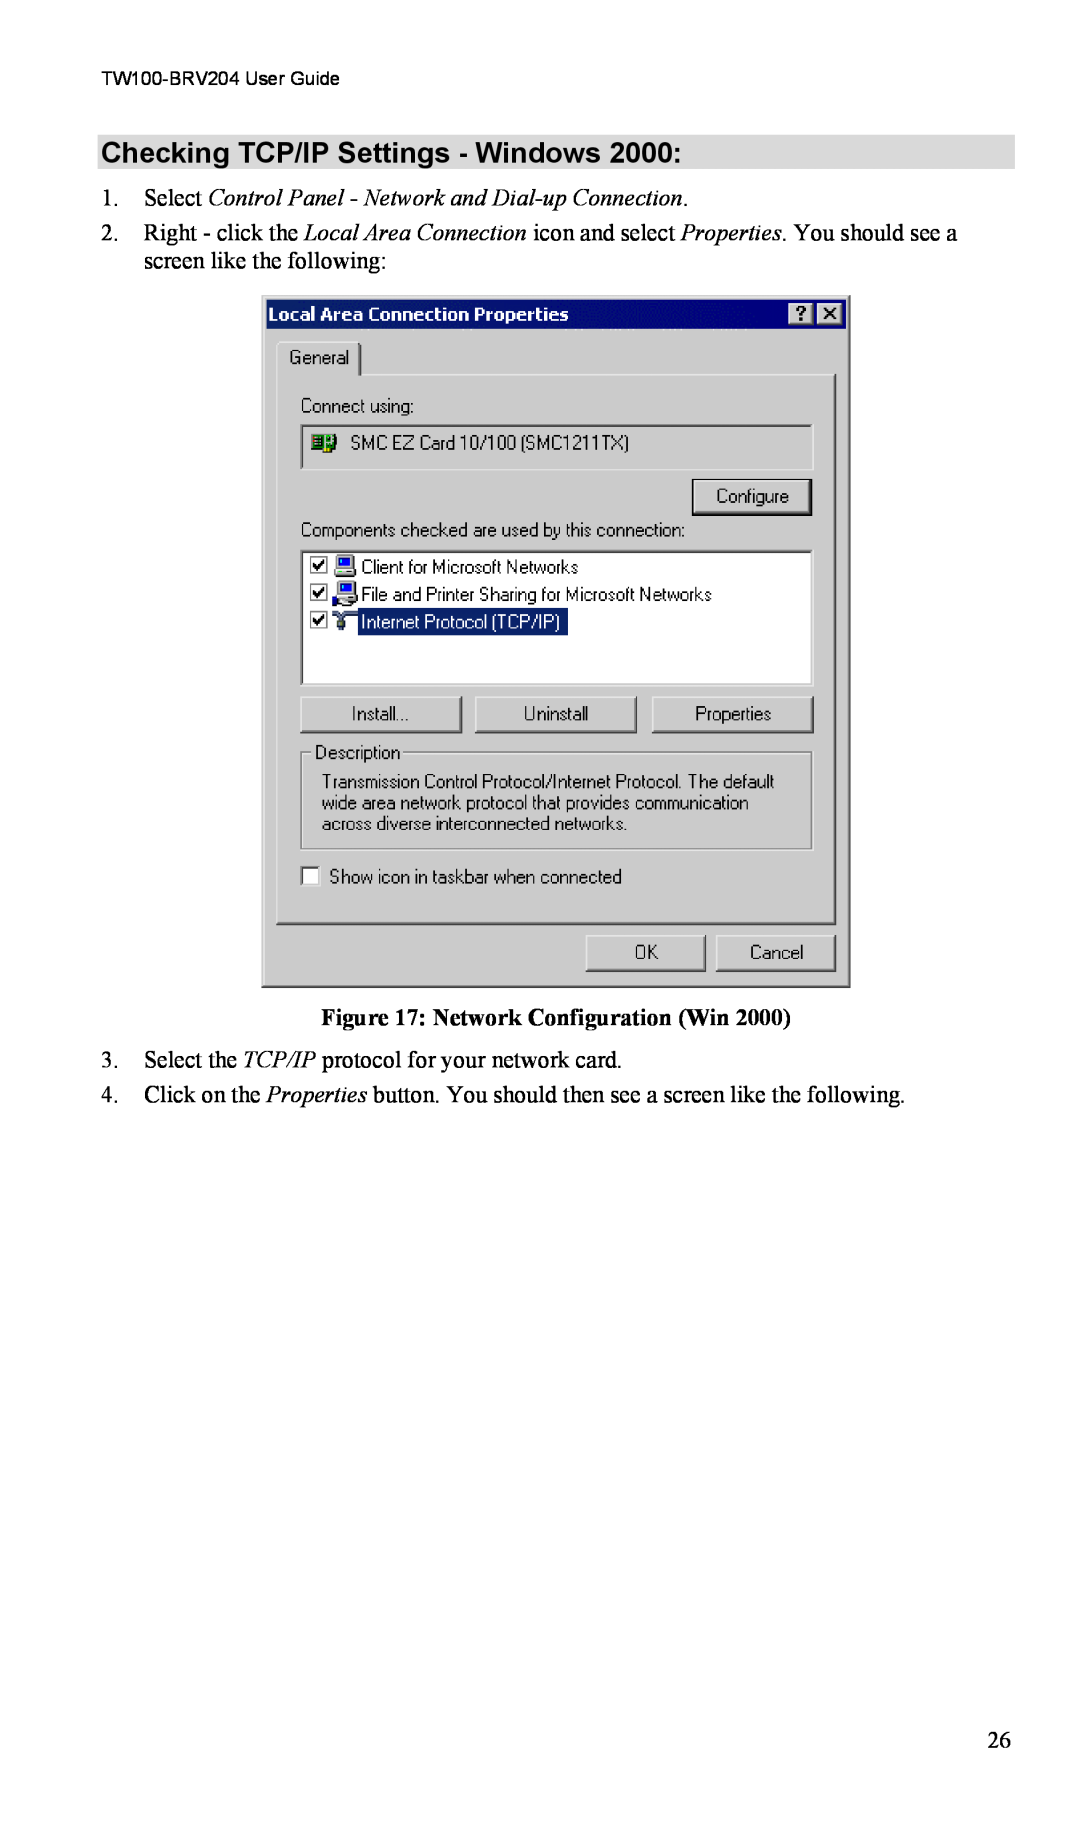 TRENDnet VPN Firewall Router Checking TCP/IP Settings - Windows, Select Control Panel - Network and Dial-up Connection 